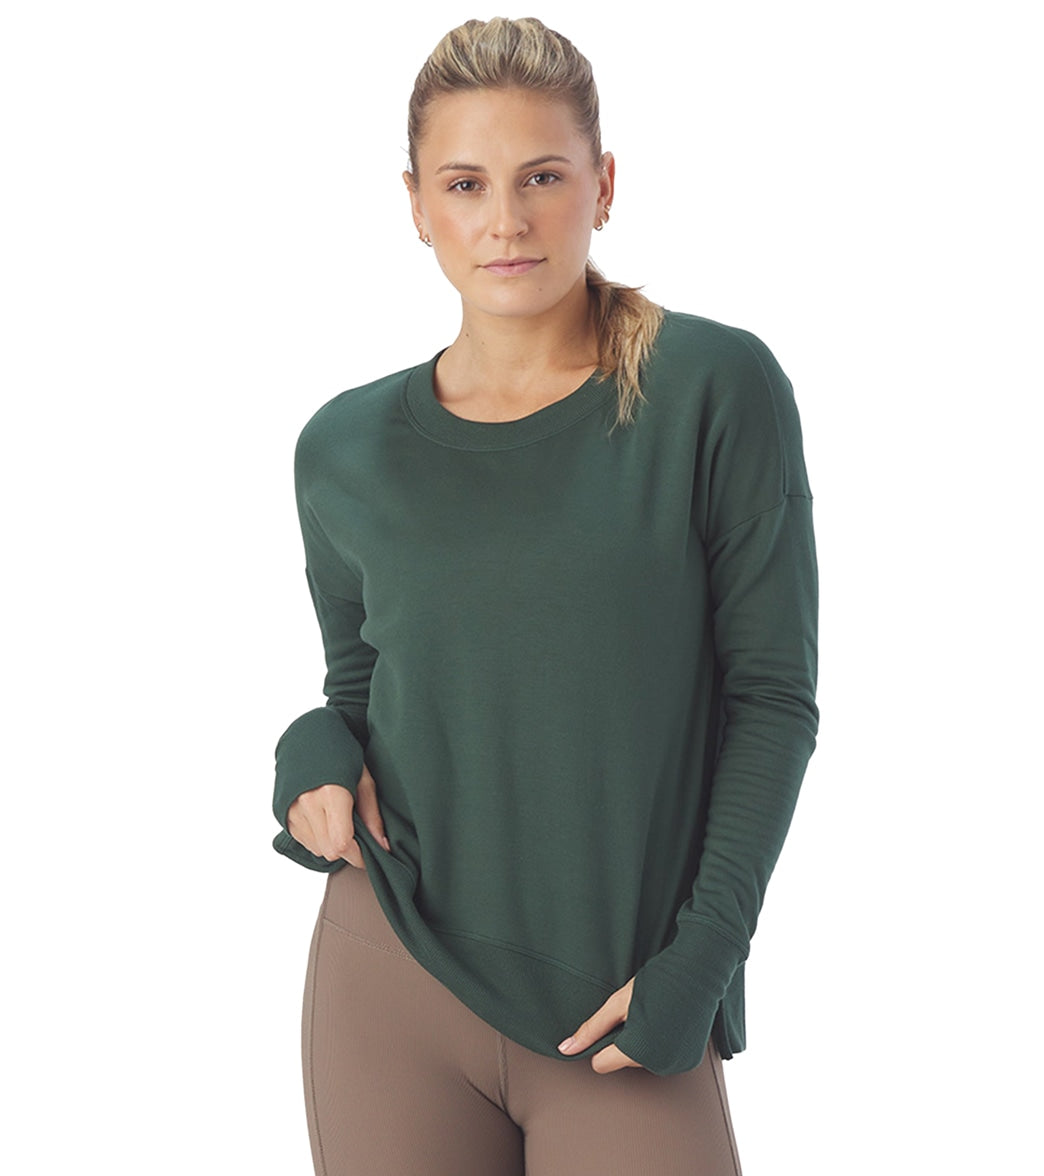 Glyder Lounge Long Sleeve Tee at YogaOutlet.com - Free Shipping